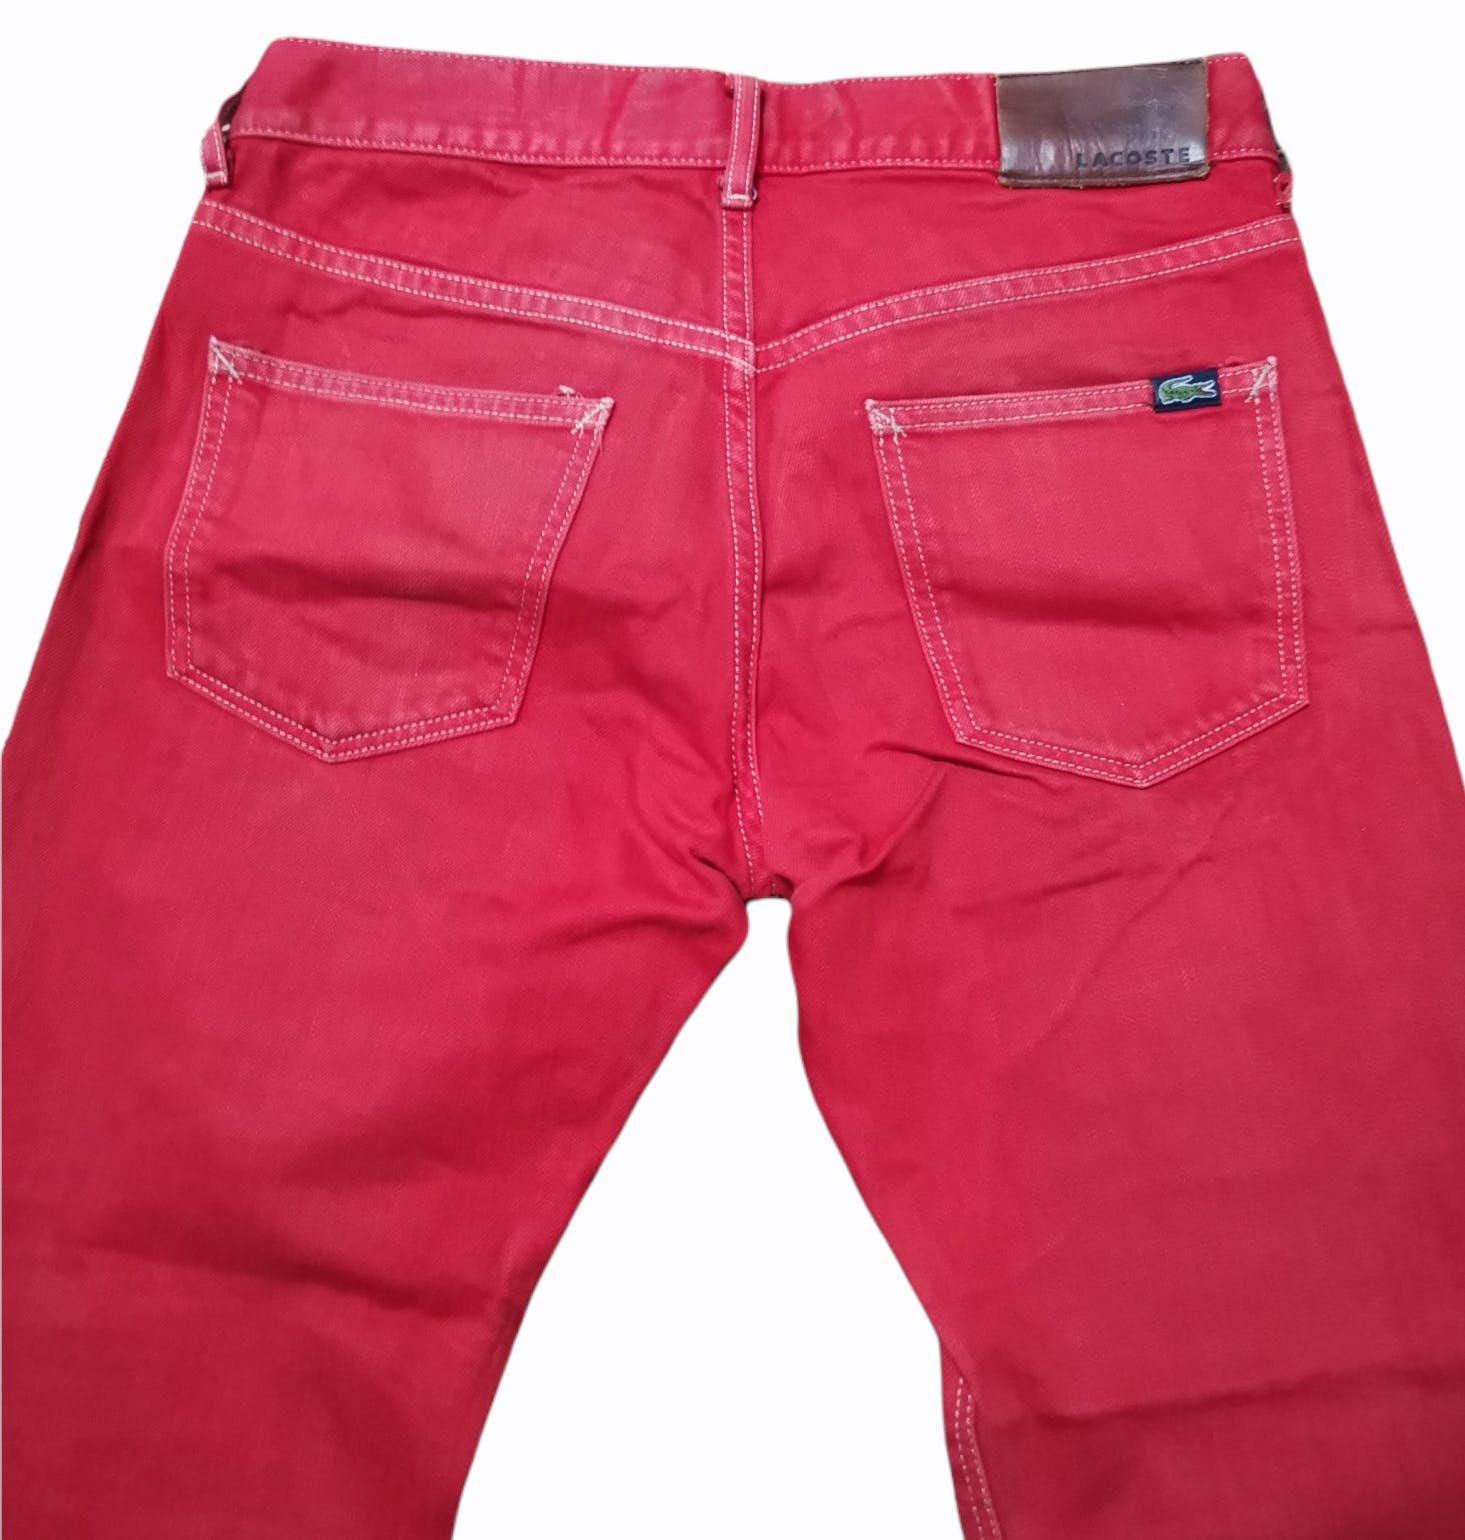 Lacoste Dirty Red Denim - 4